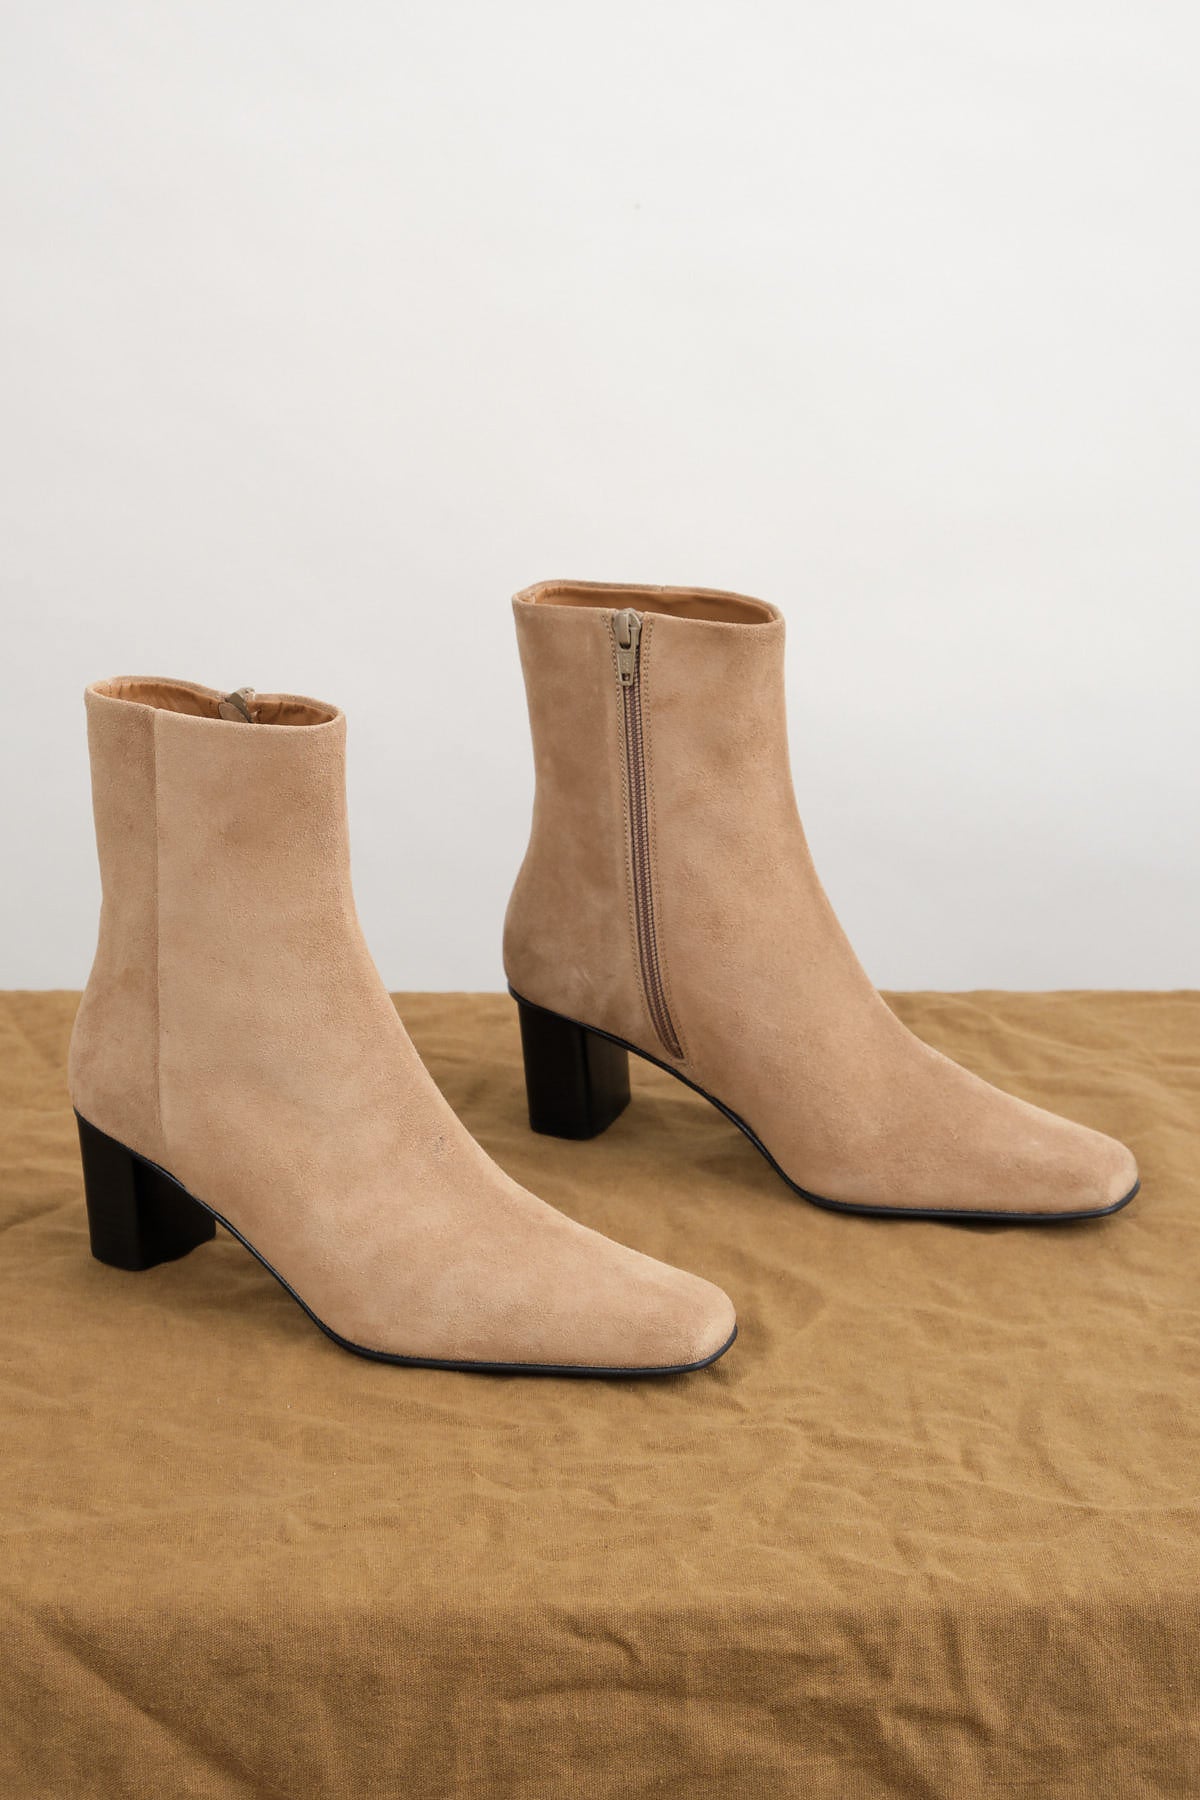 Praia Suede Boot on table